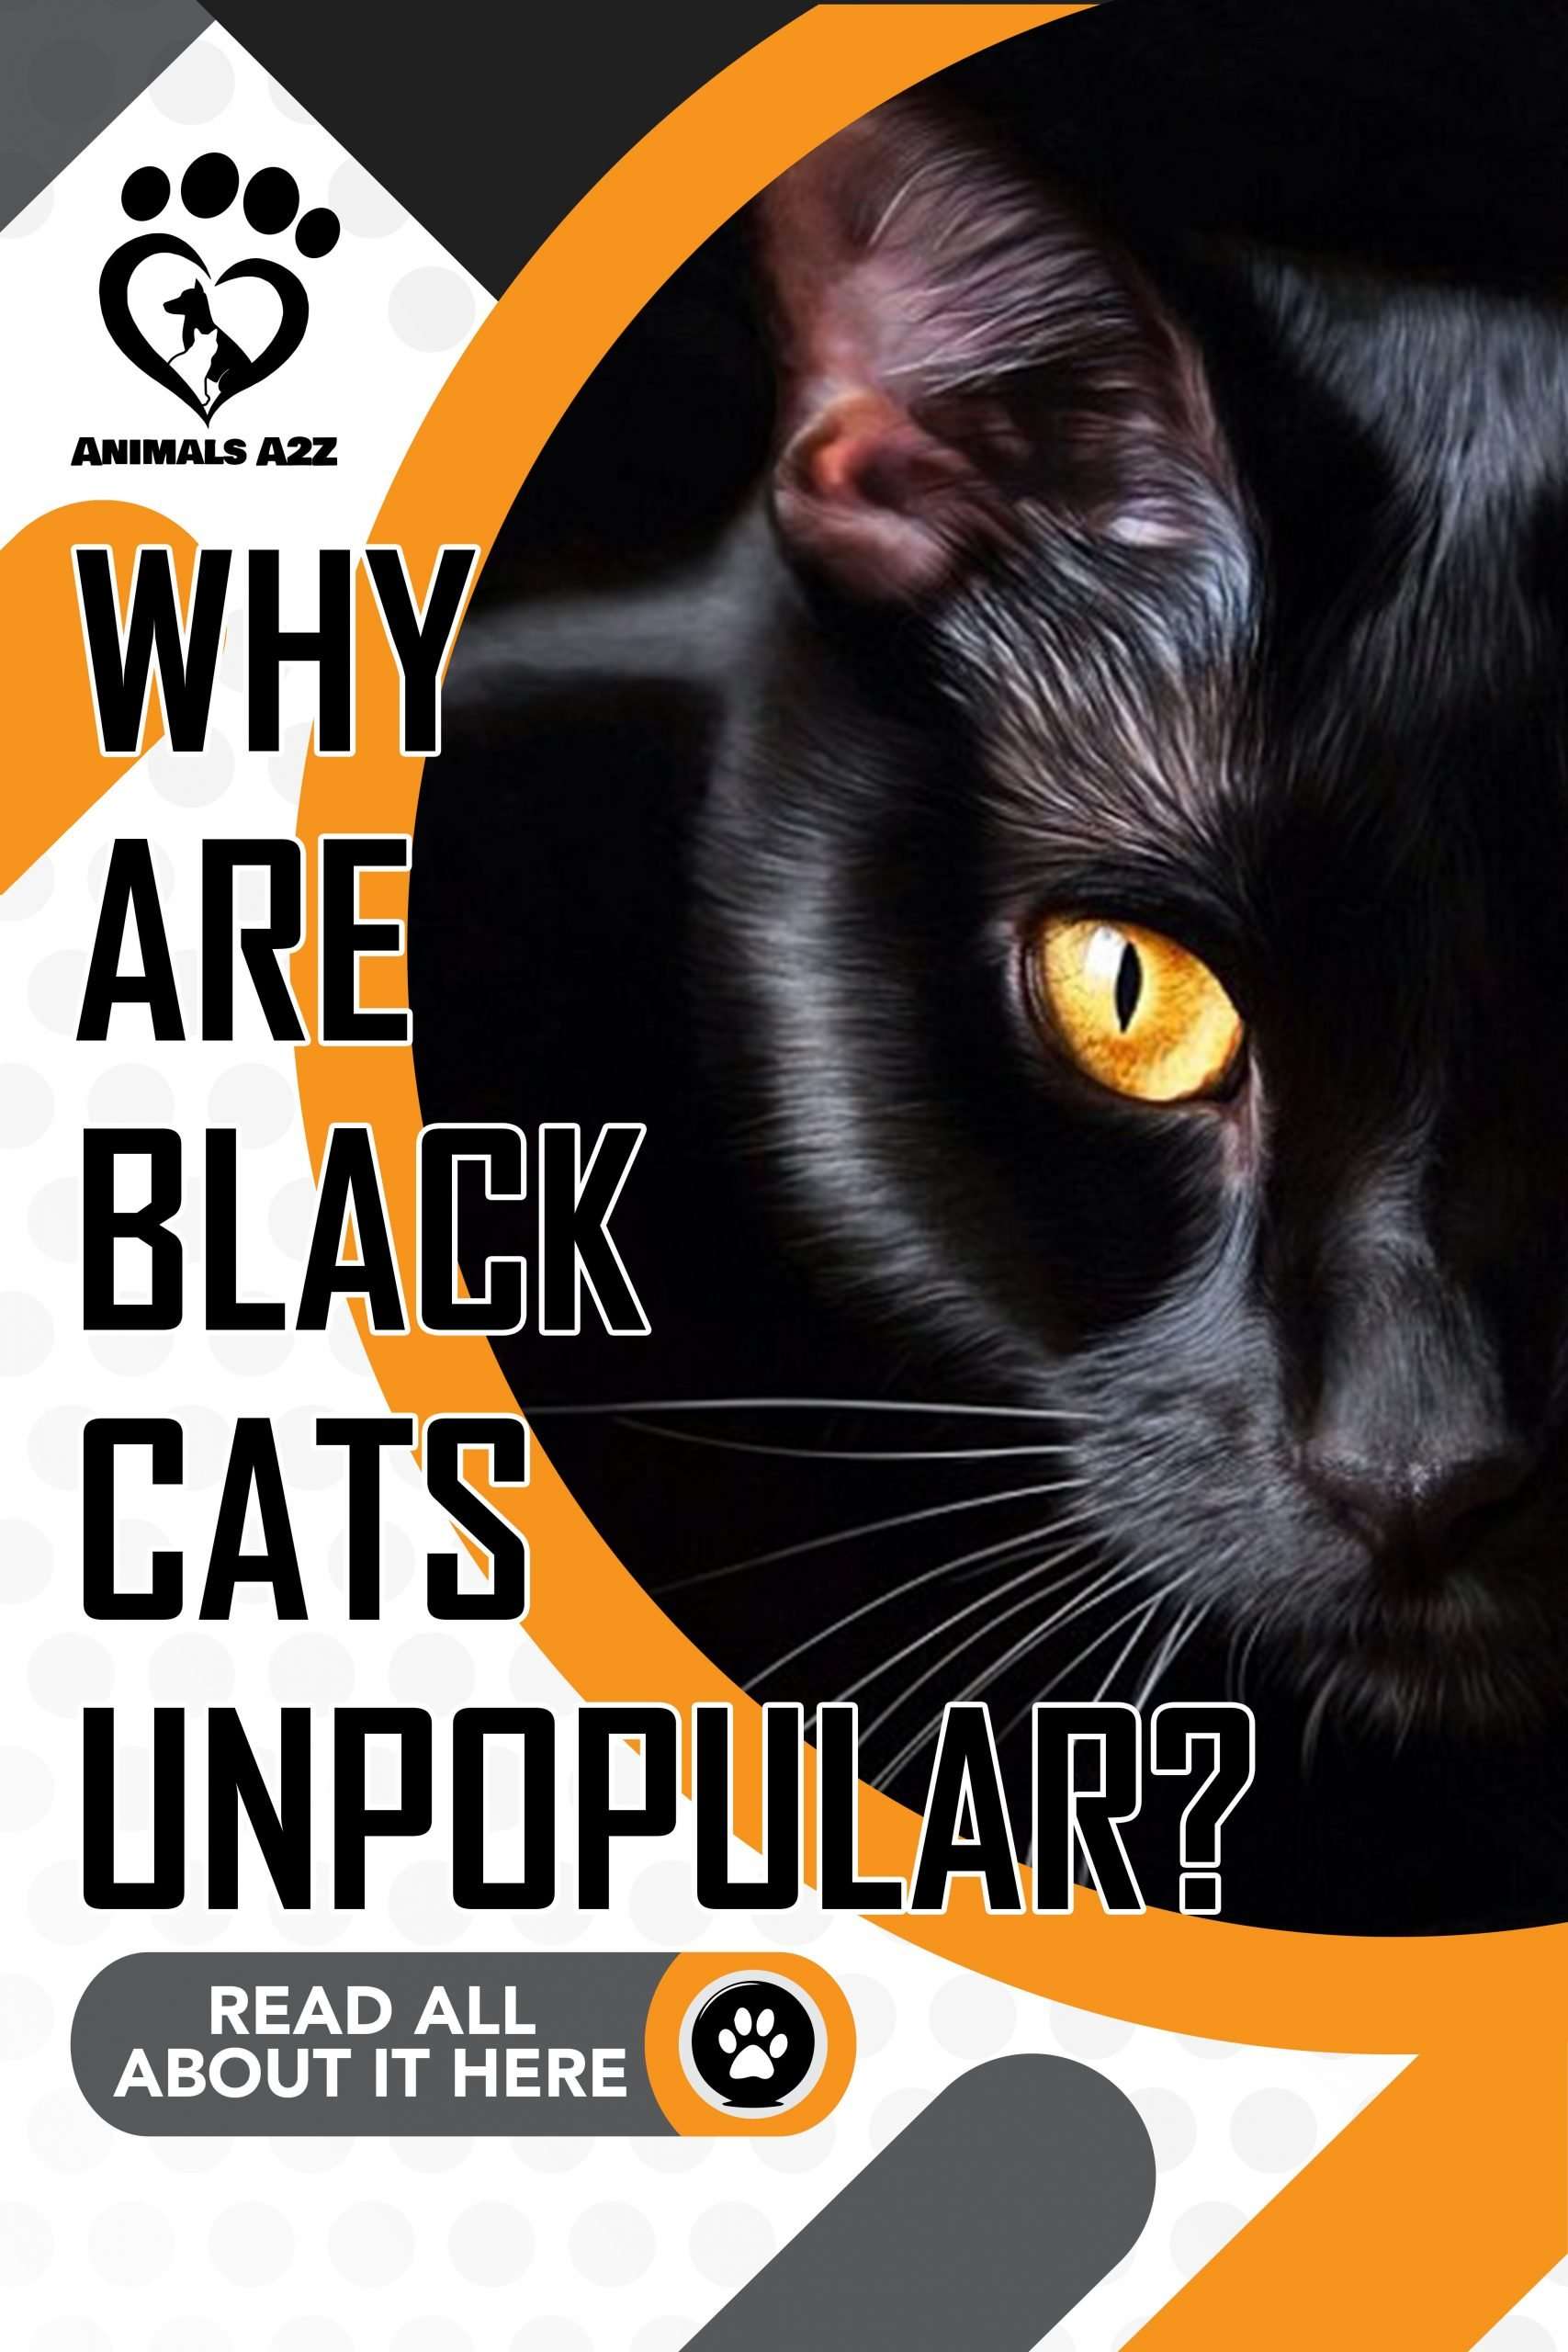 Why are black cats unpopular?